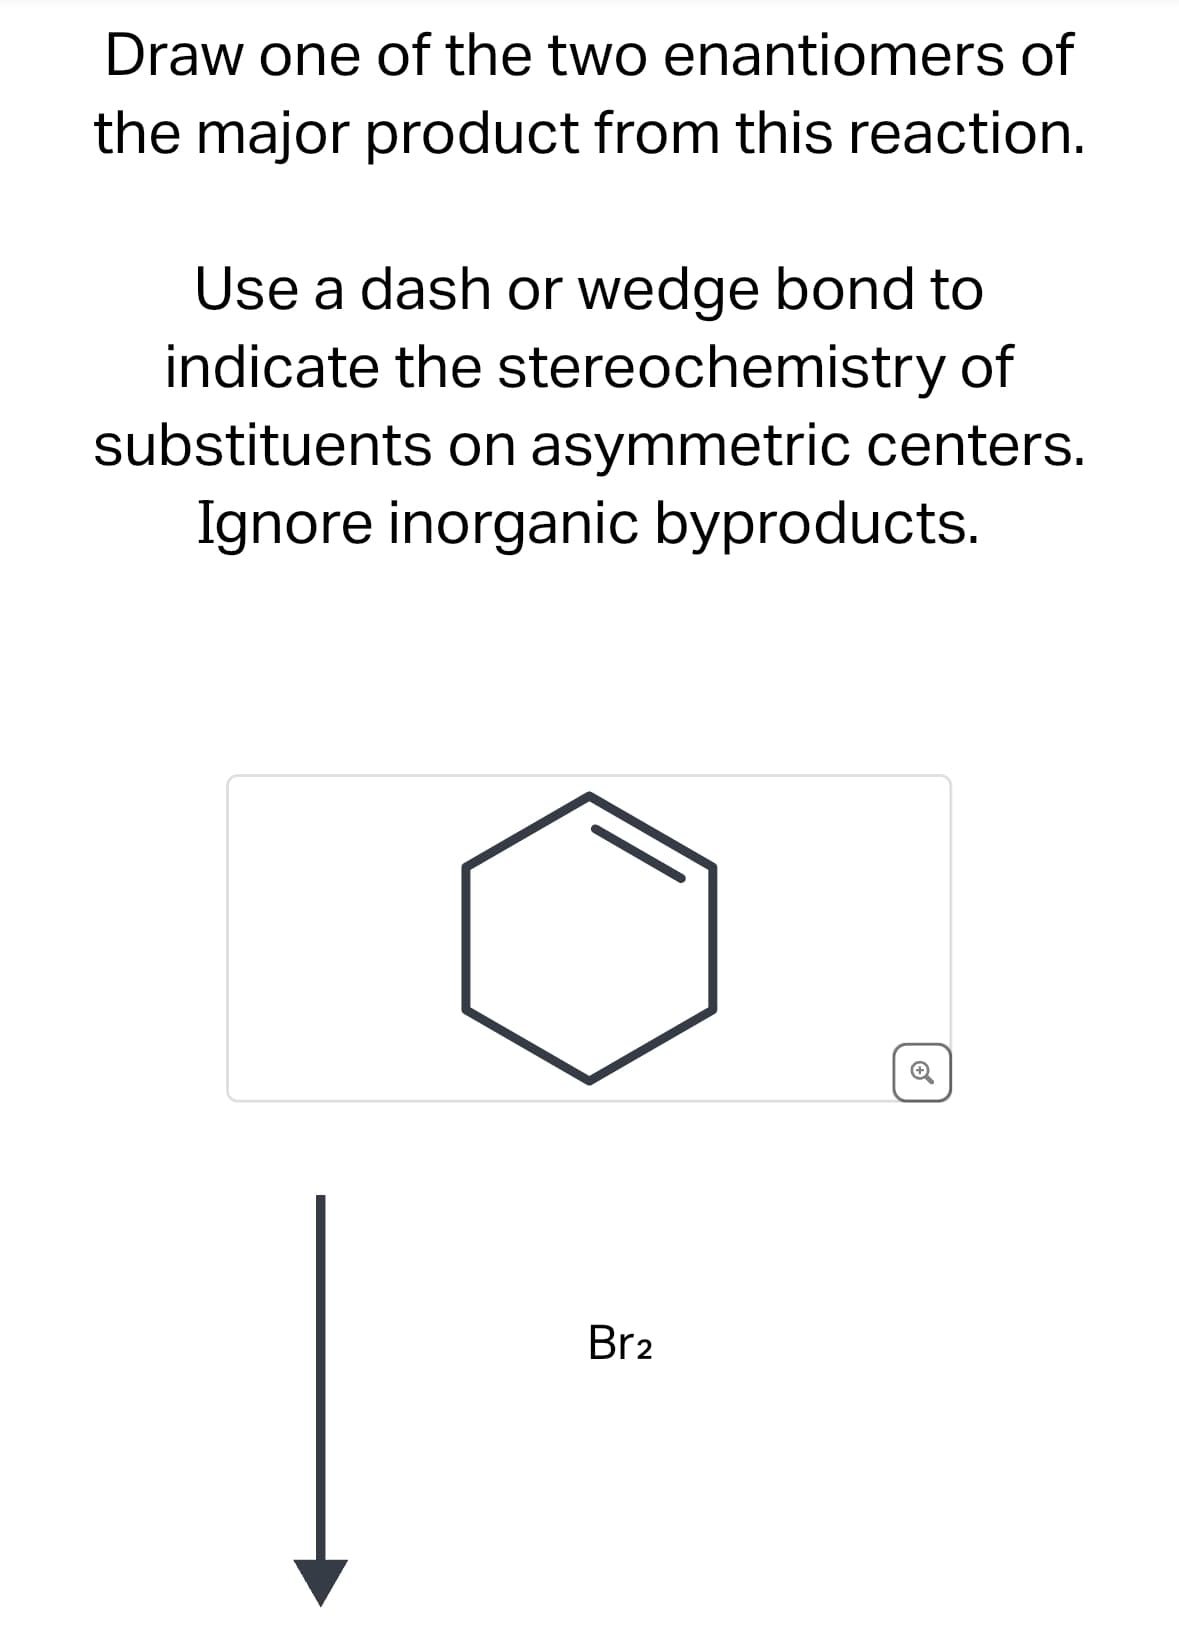 Draw one of the two enantiomers of
the major product from this reaction.
Use a dash or wedge bond to
indicate the stereochemistry of
substituents on asymmetric centers.
Ignore inorganic byproducts.
Br2
C